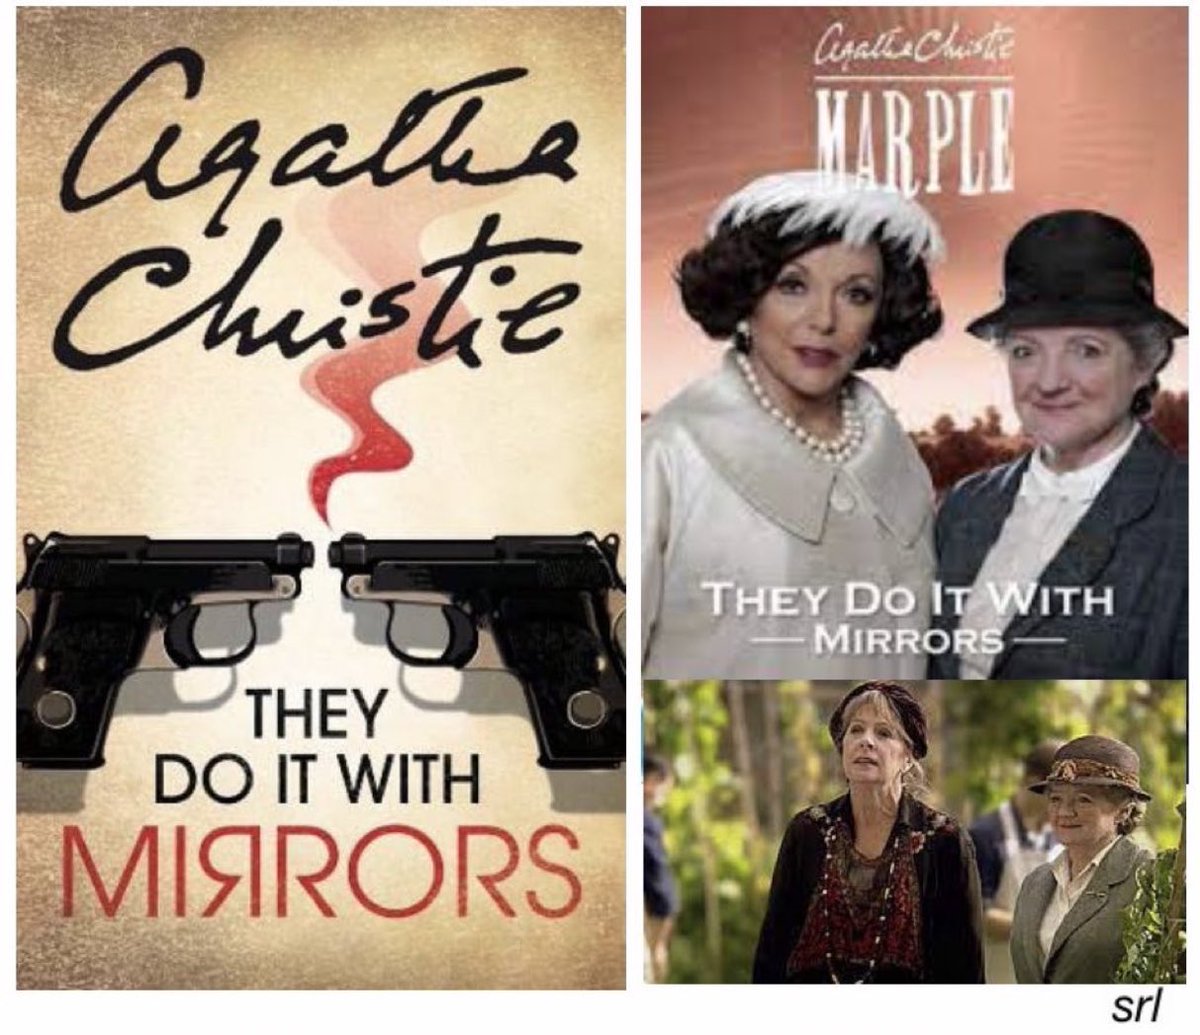 5pm TODAY on #ITV3 From 2010, s4 Ep 3 (of 4) of “Agatha Christie’s Marple” “They Do It With Mirrors” directed by #AndyWilson & written by #PaulRutman Based on #AgathaChristie’s 1952 novel📖 🌟#JuliaMcKenzie as #MissMarple #JoanCollins #BrianCox #PenelopeWilton